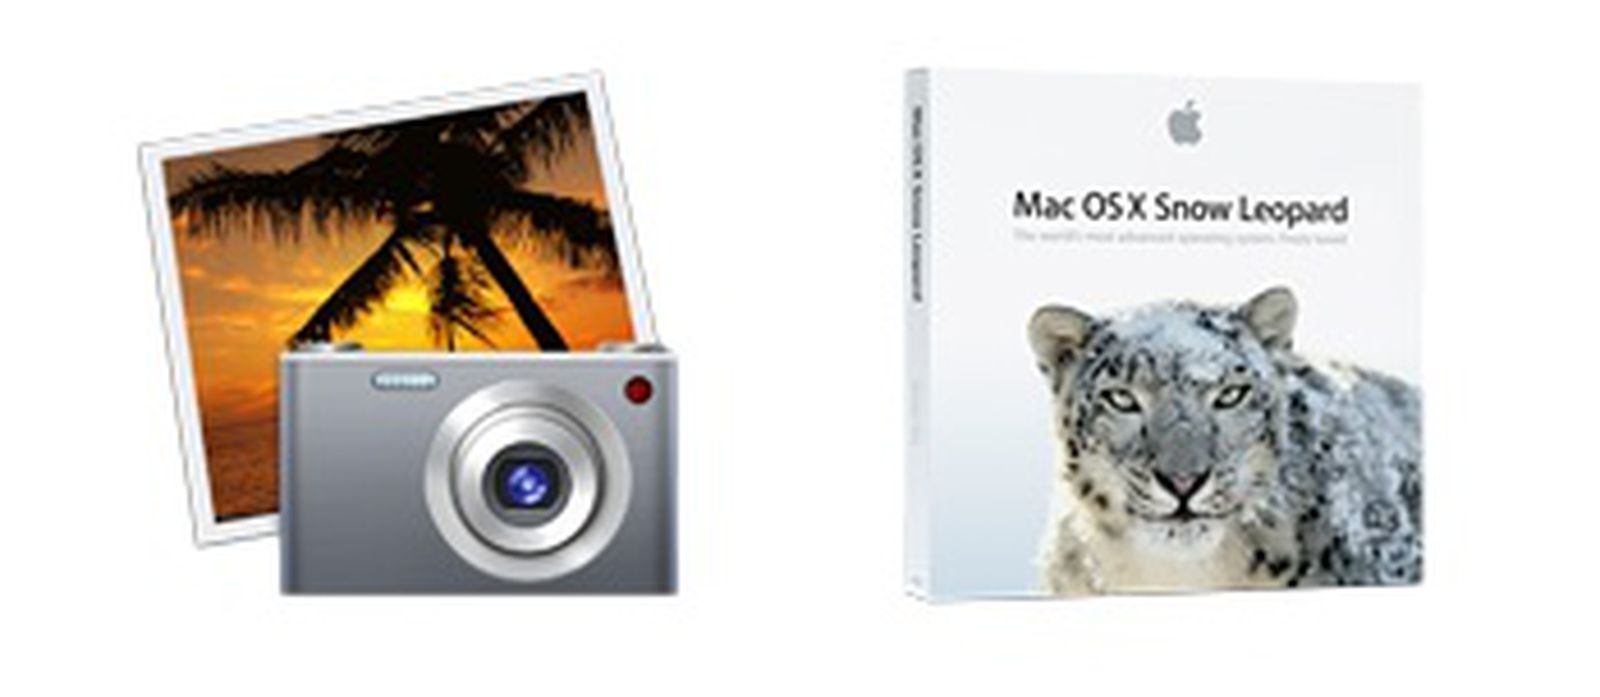 iphoto 9.1 download apple